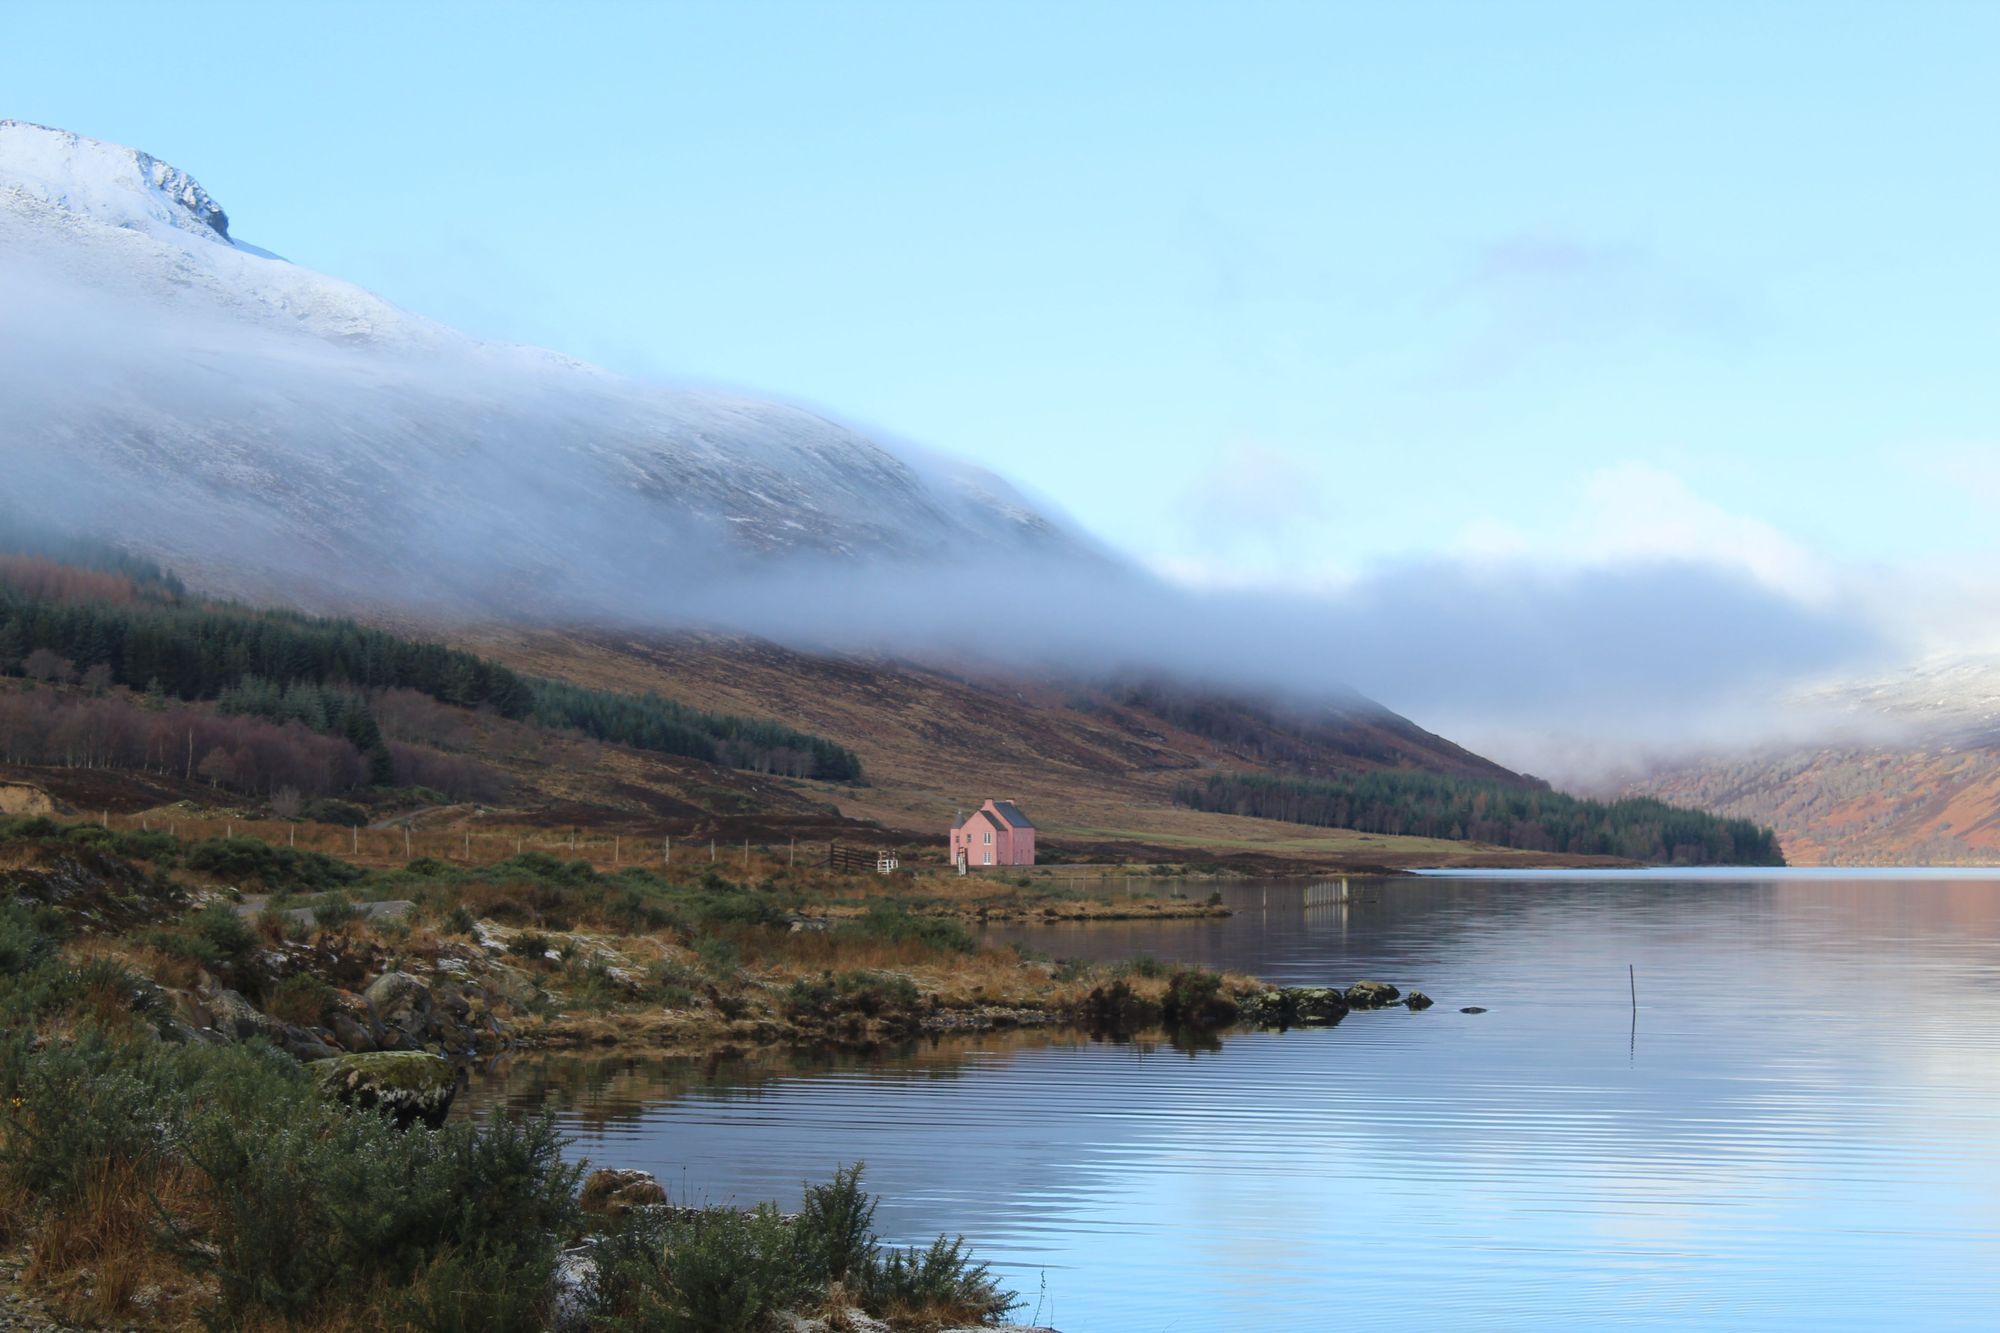 The mist hits Loch Glass, and rolls above the Pink House, on the edge of the water. Photo: Stuart Kenny